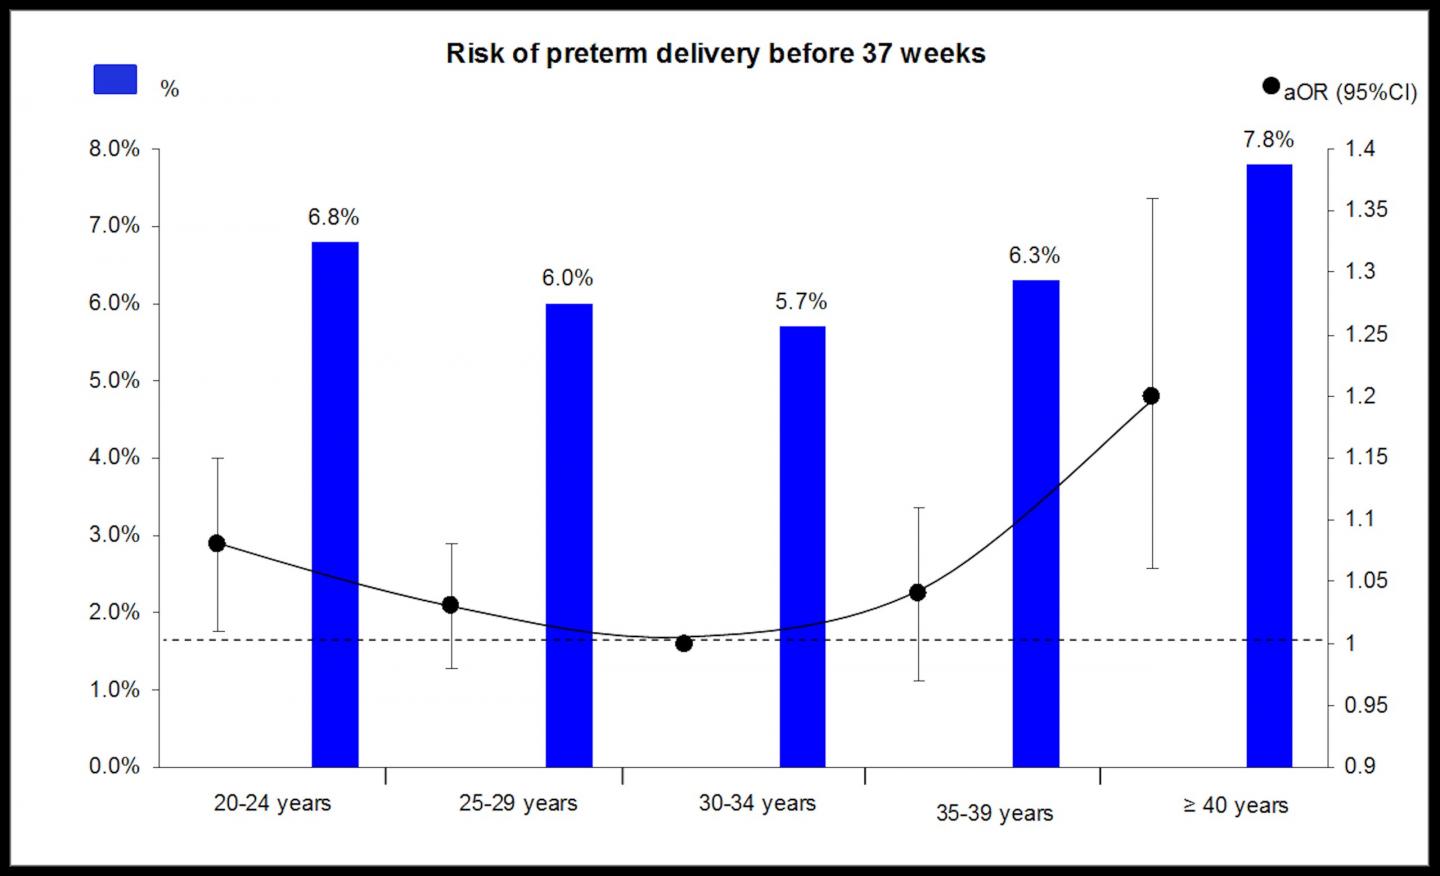 Maternal Age Over 40 Is Associated with An Increased Risk of Preterm Birth